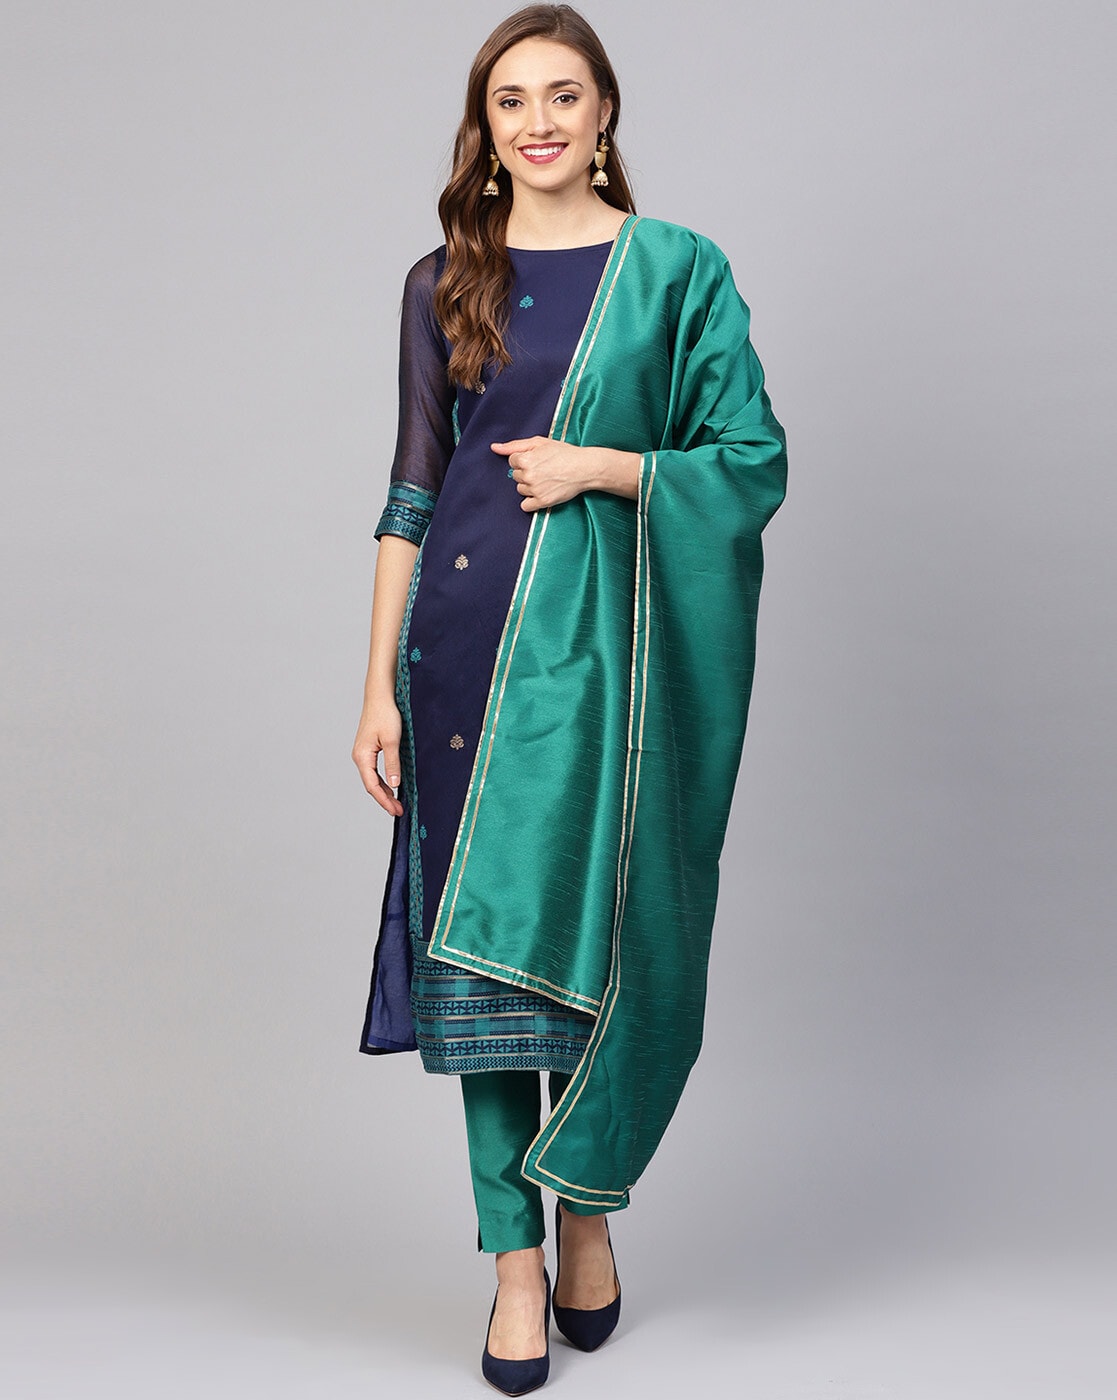 Nyra Cut kurti Suit For Women Party Wear